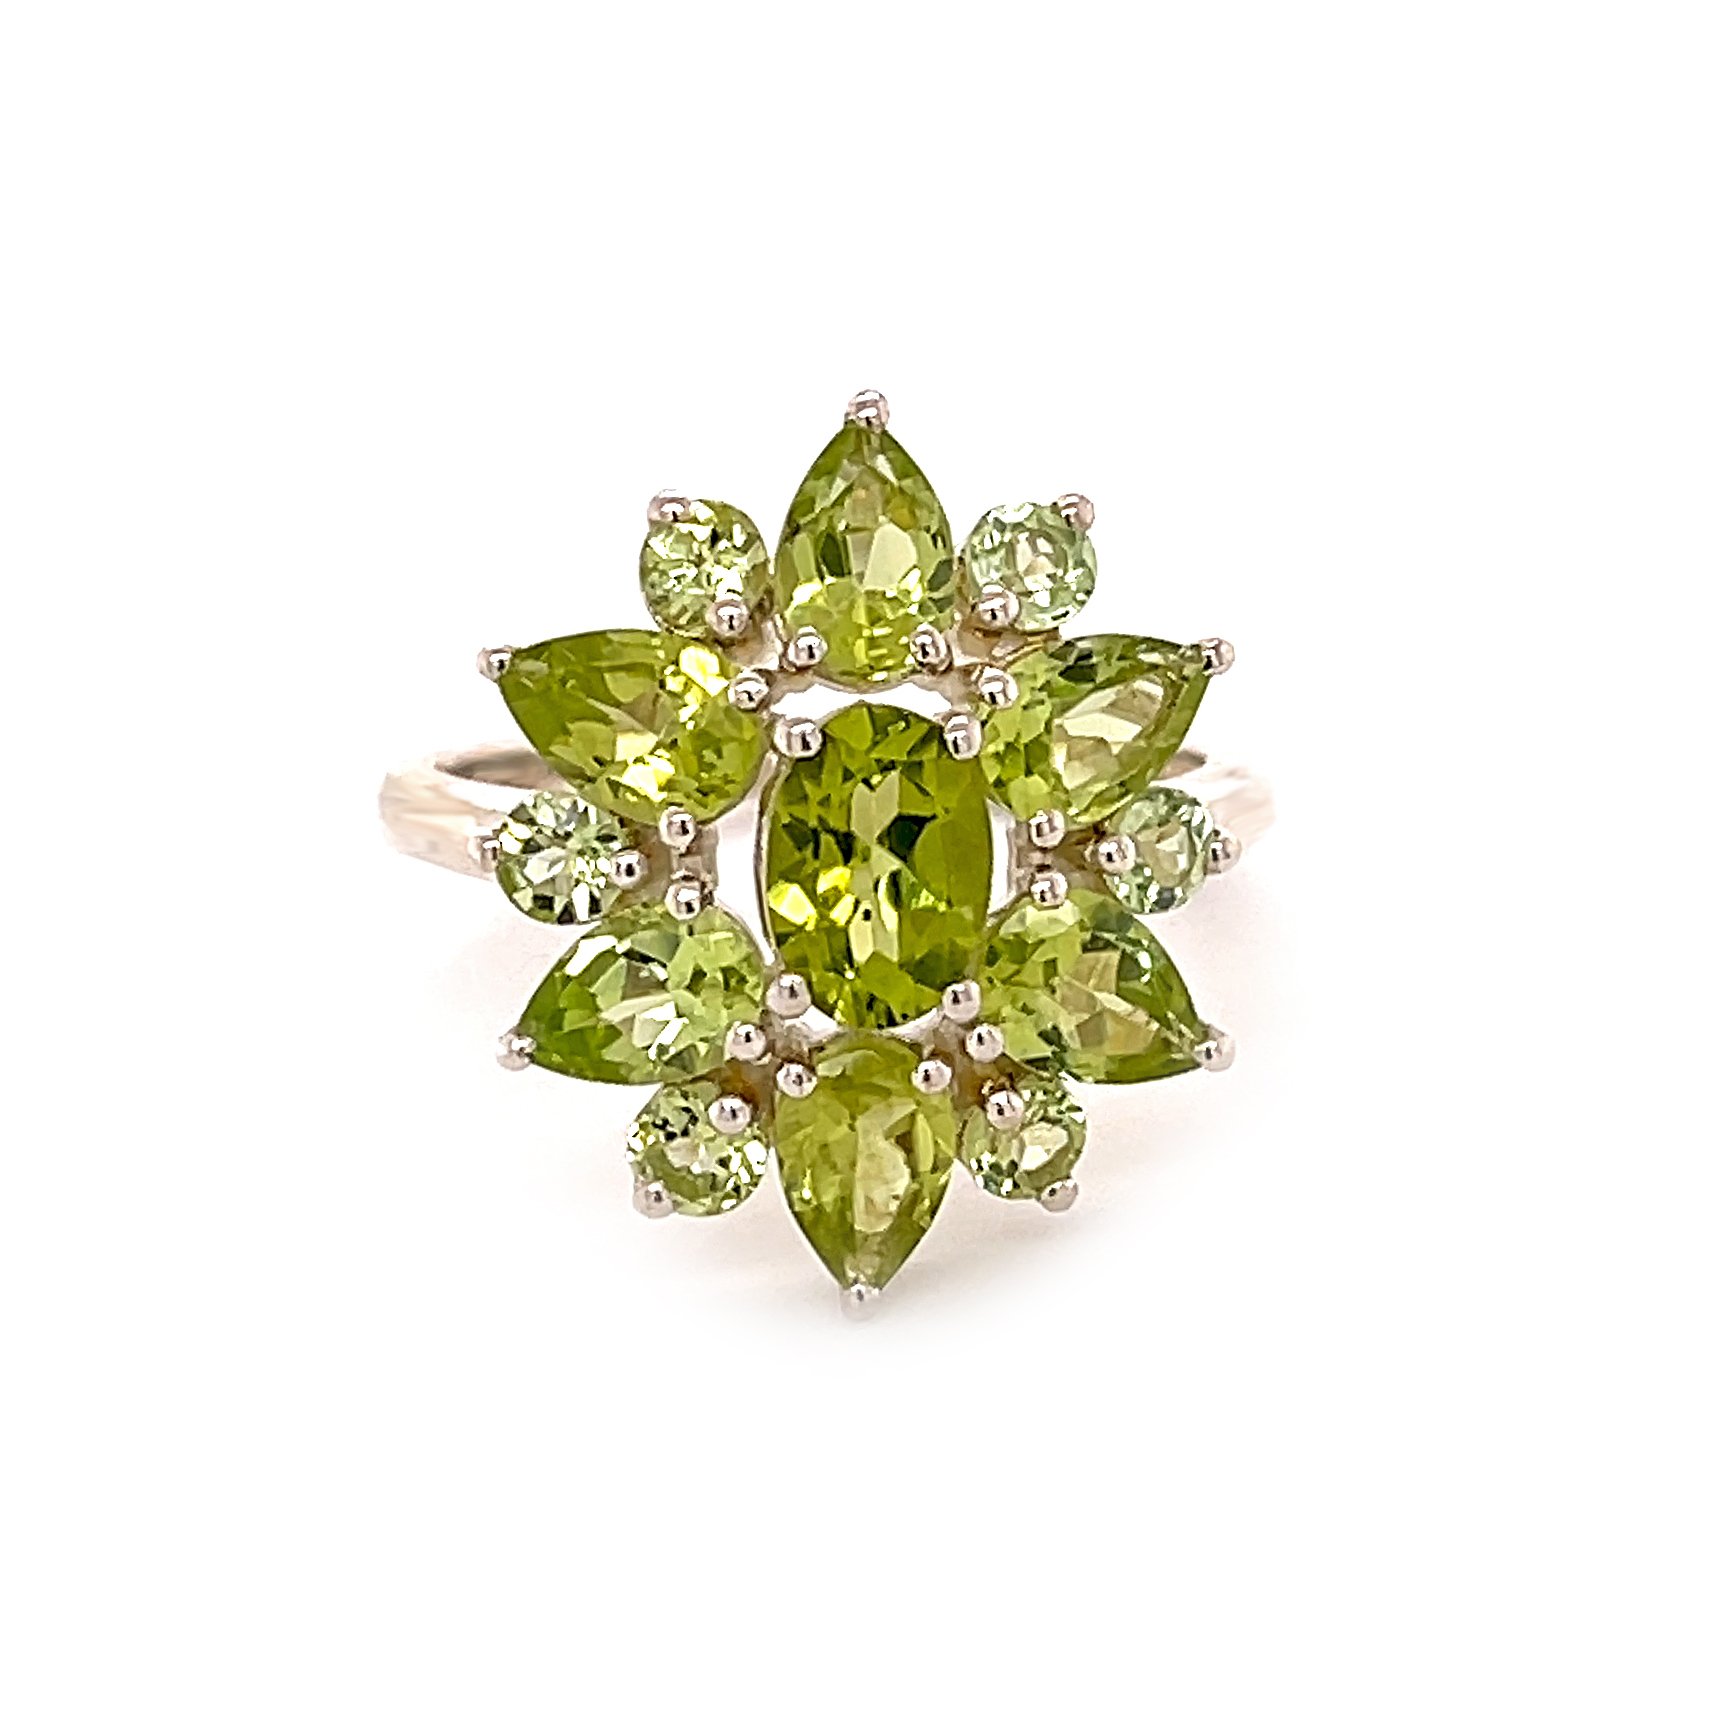 Peridot Flower Ring Size 6 - Faceted Geometric Matrix Prong Set In Ornate Floral Shape